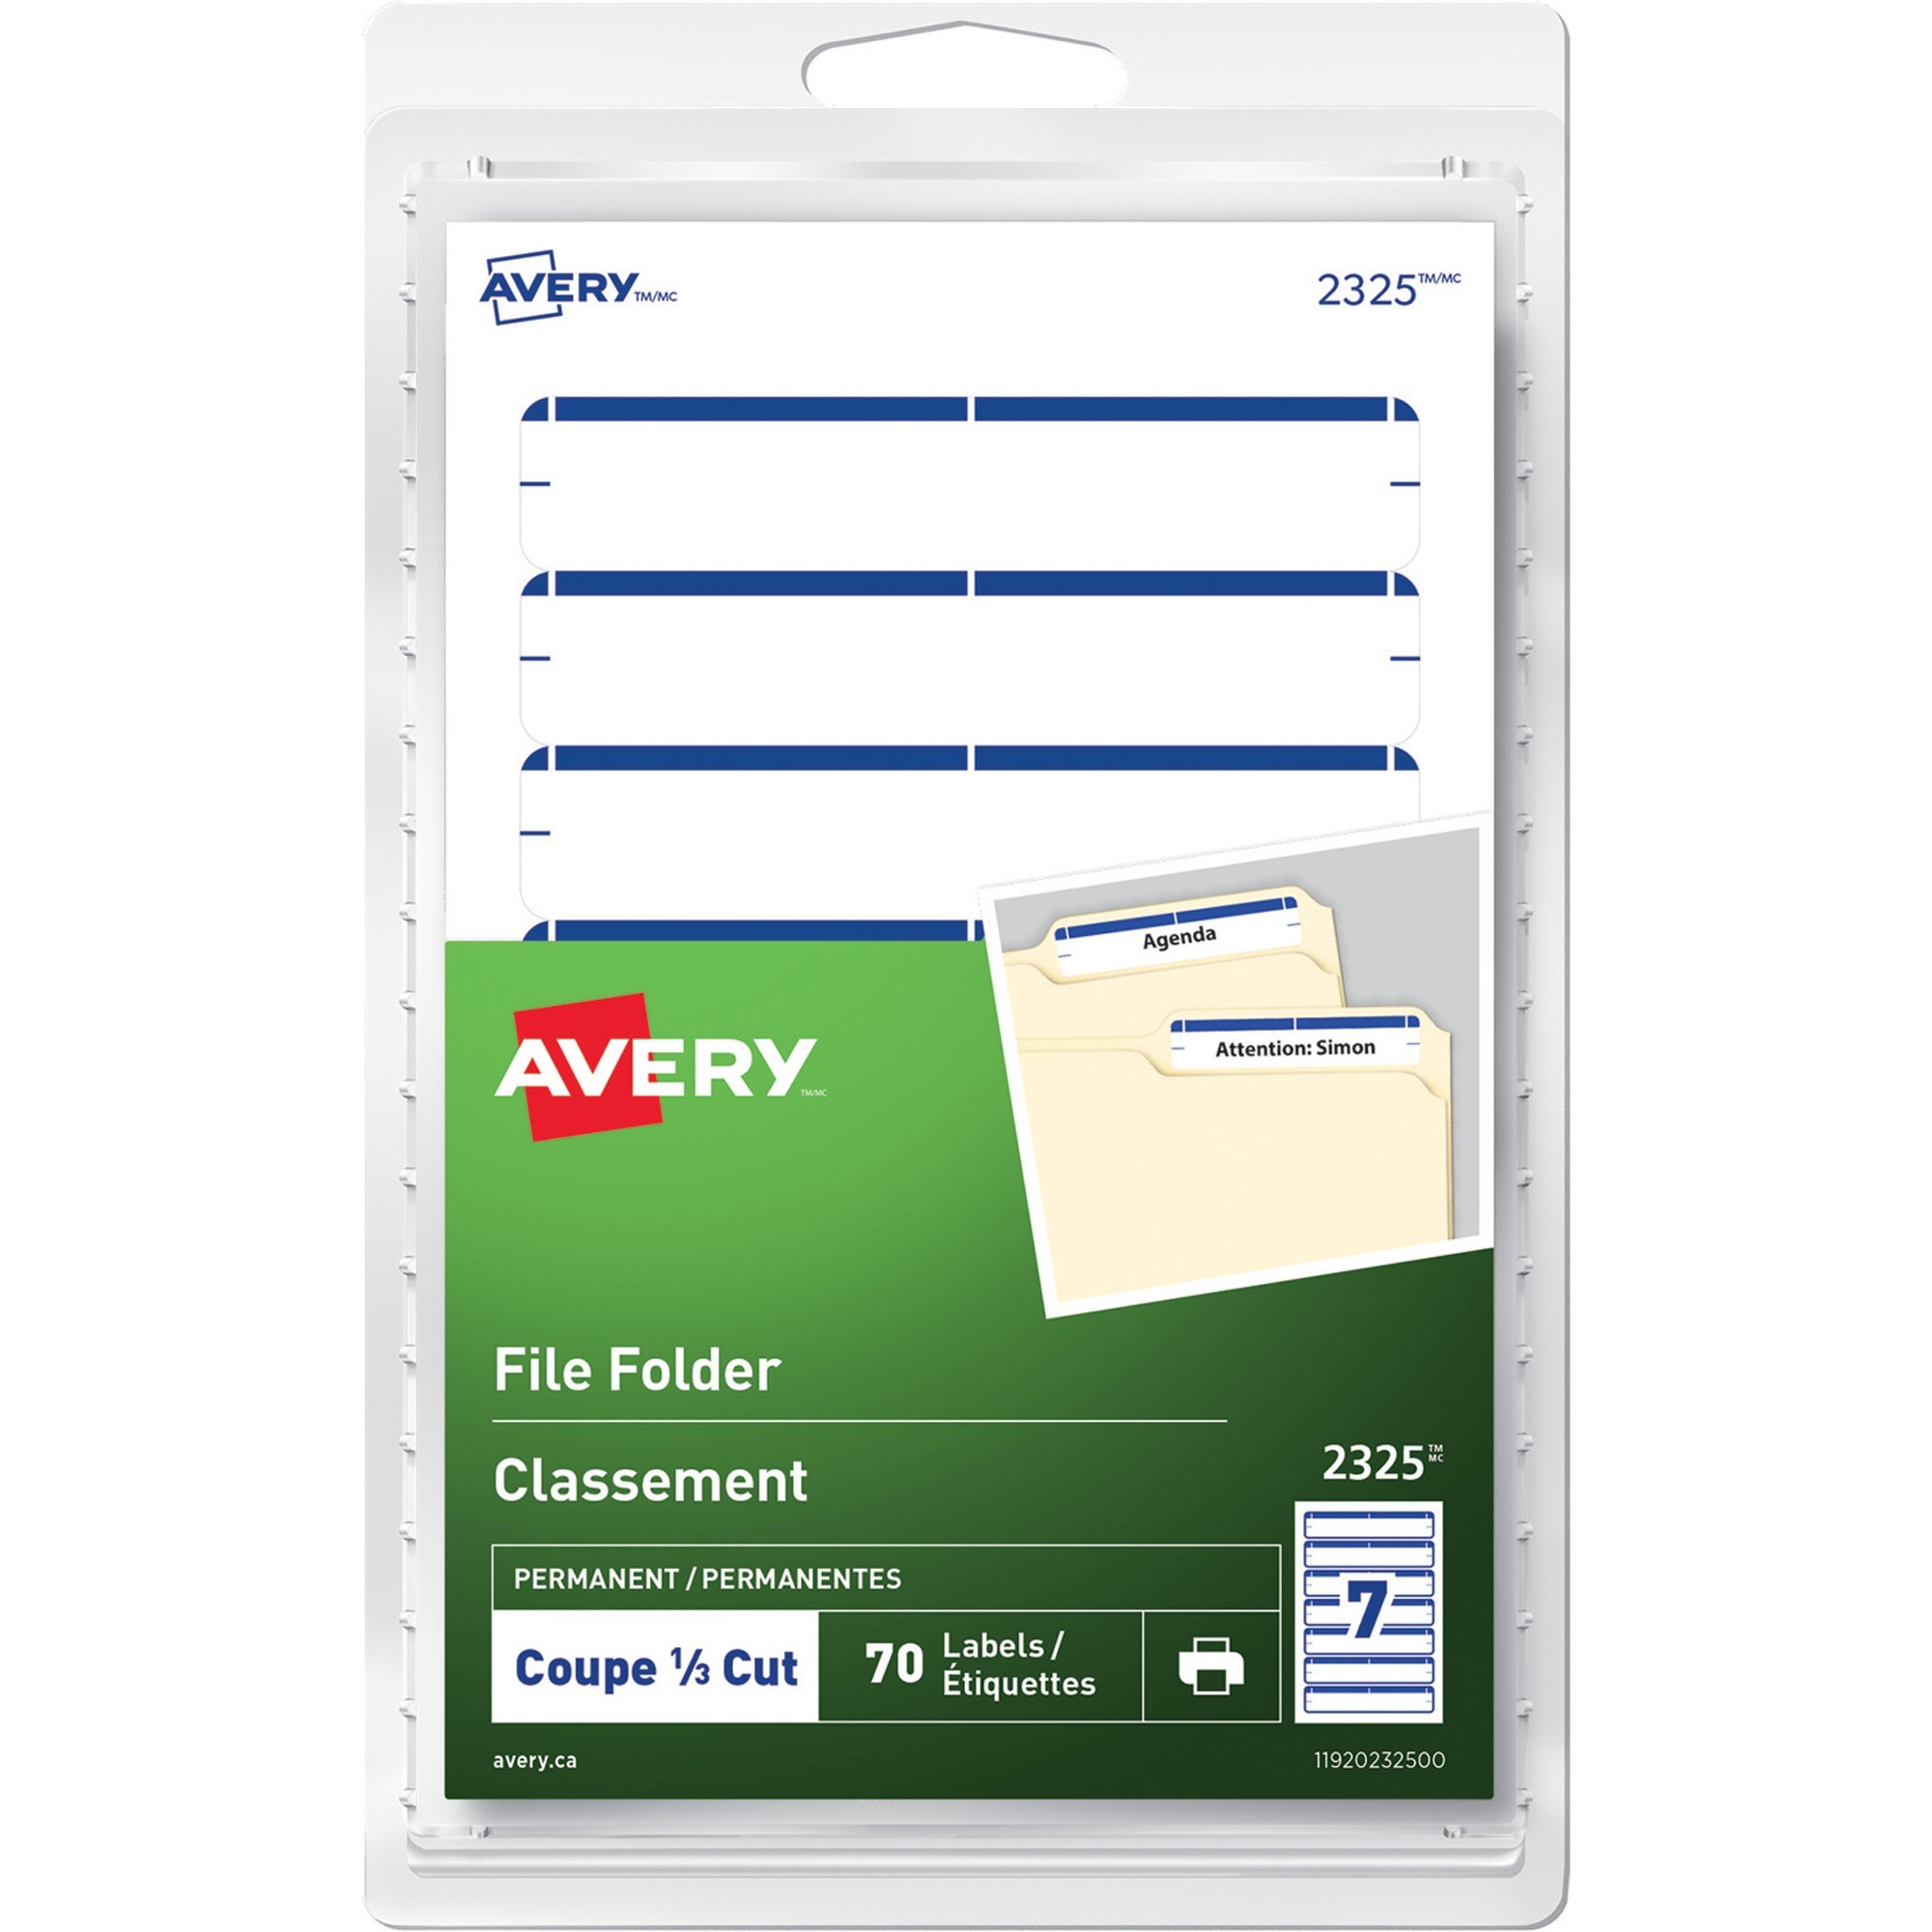 Avery Print or Write File Folder Label - Madill - The Office Company